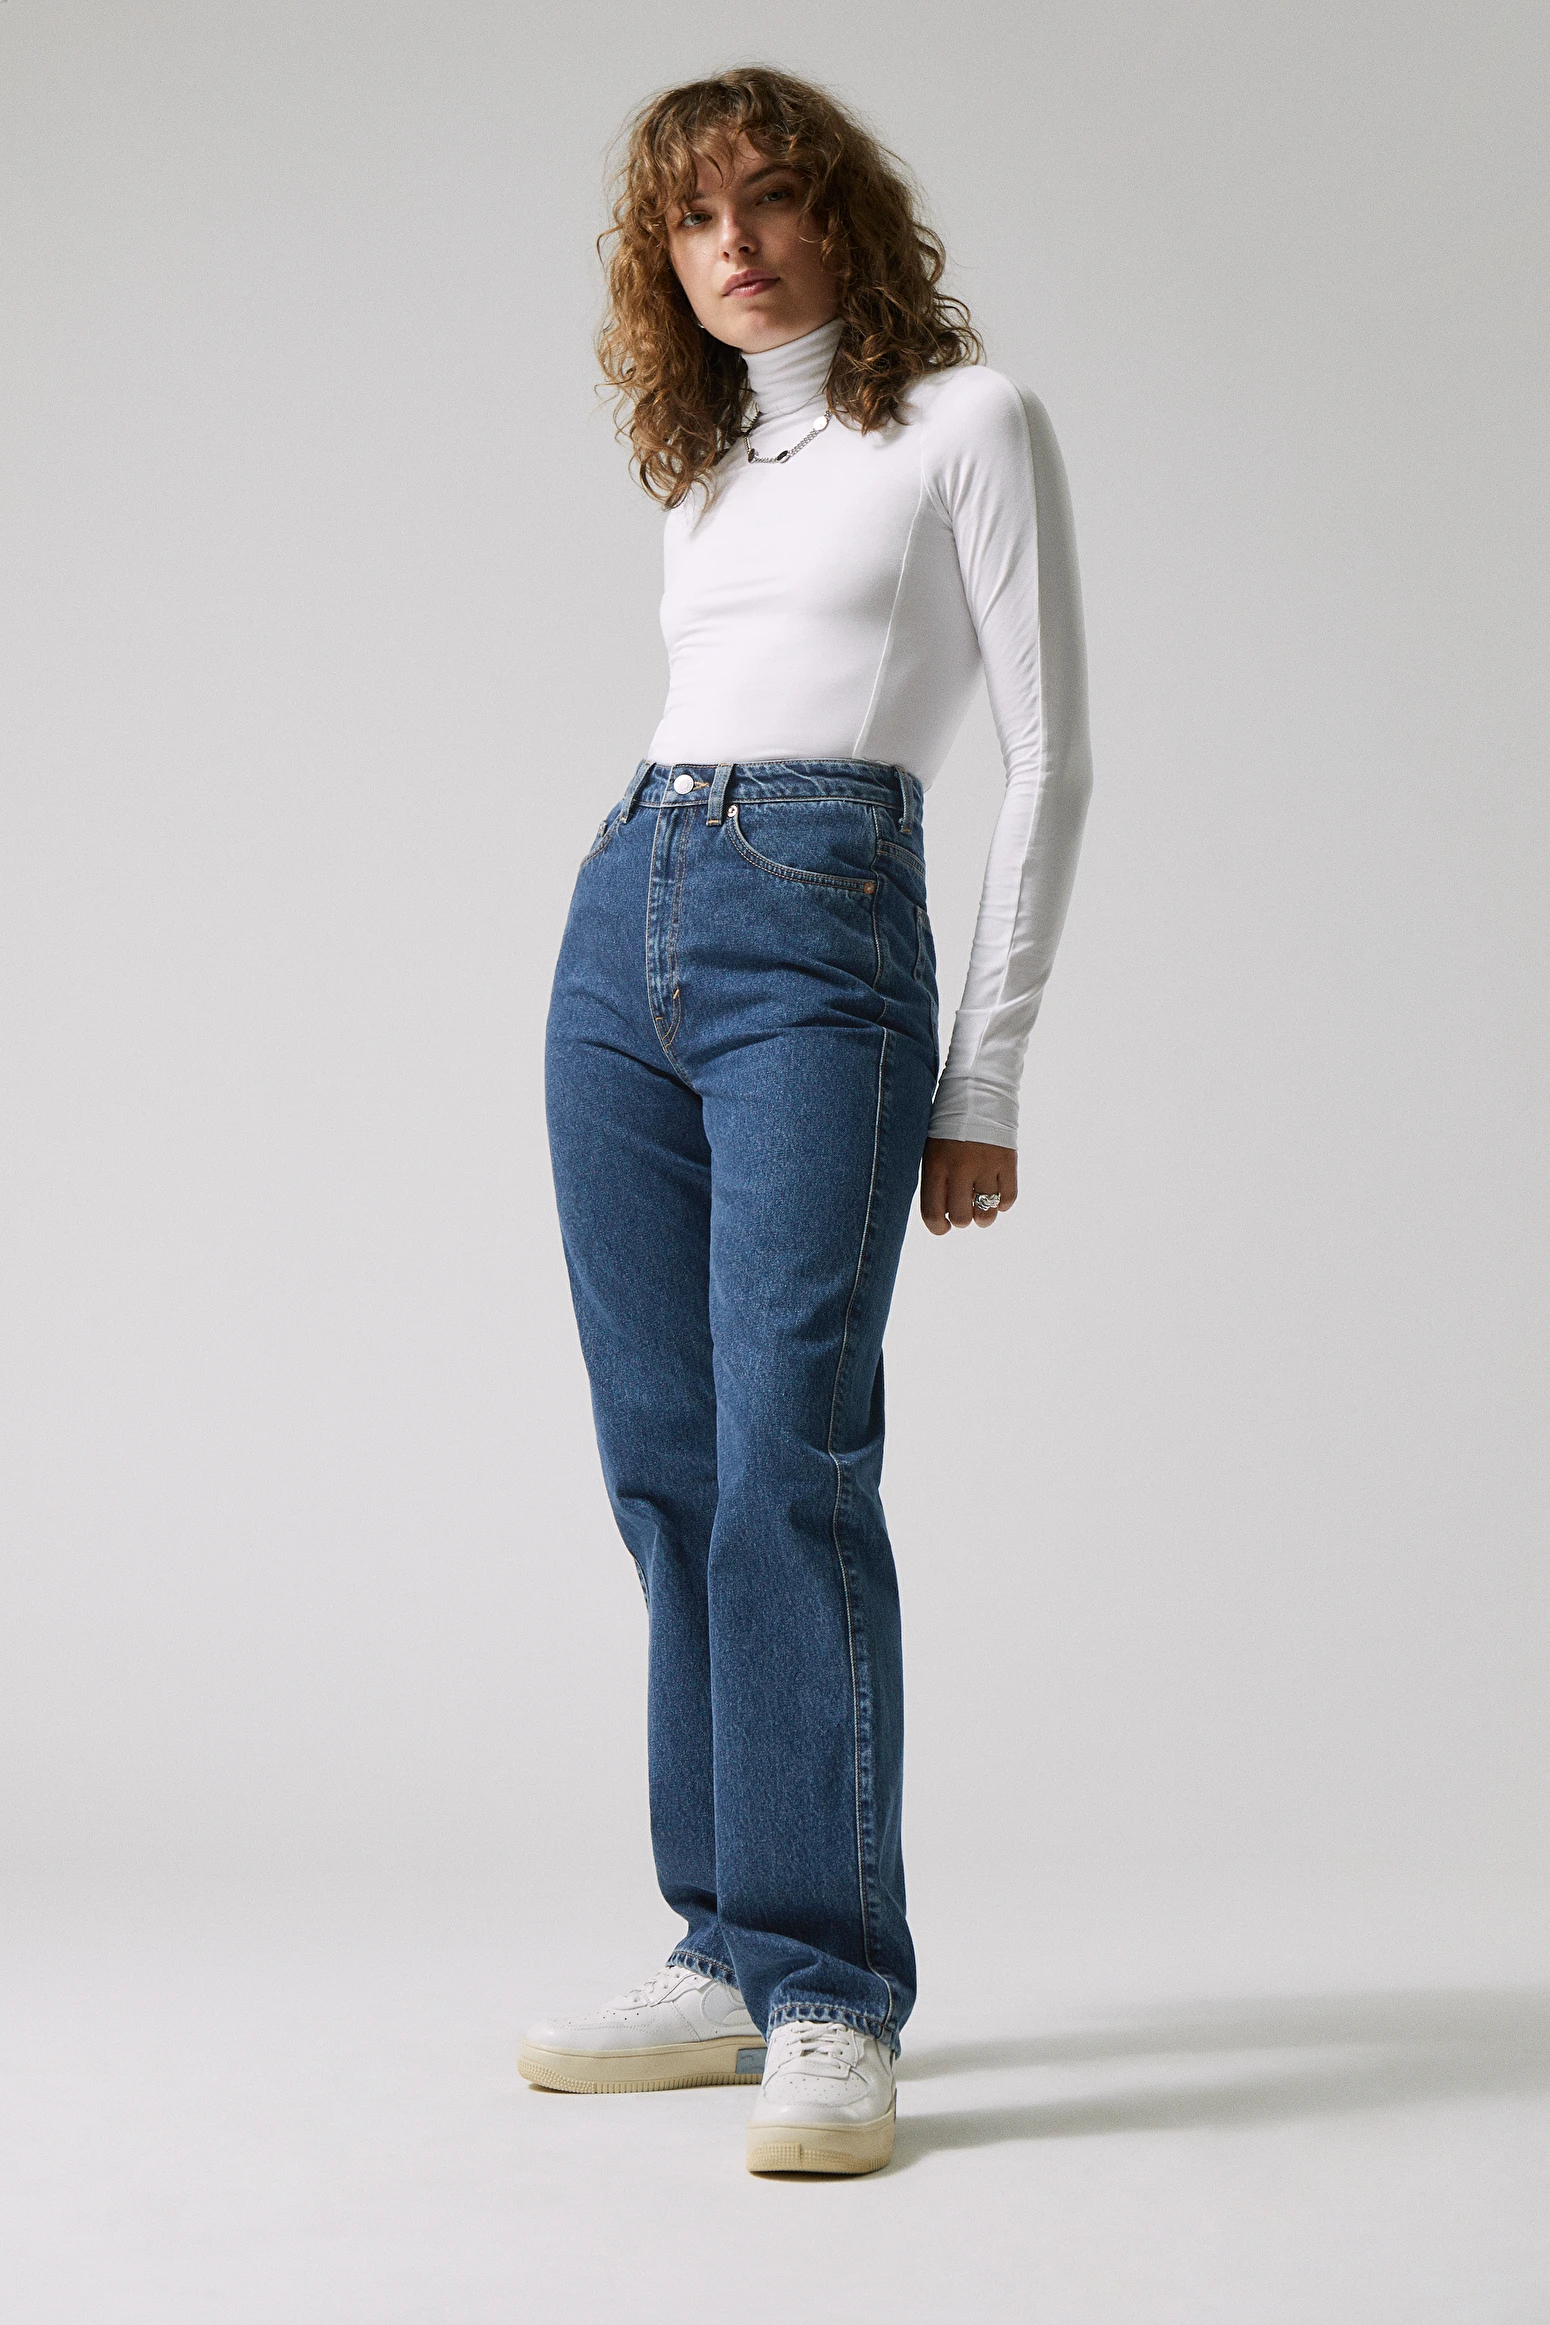 High wasted jeans have surged in popularity as a staple in fashion-forward wardrobes, universally lauded for their flattering fit and versatility.